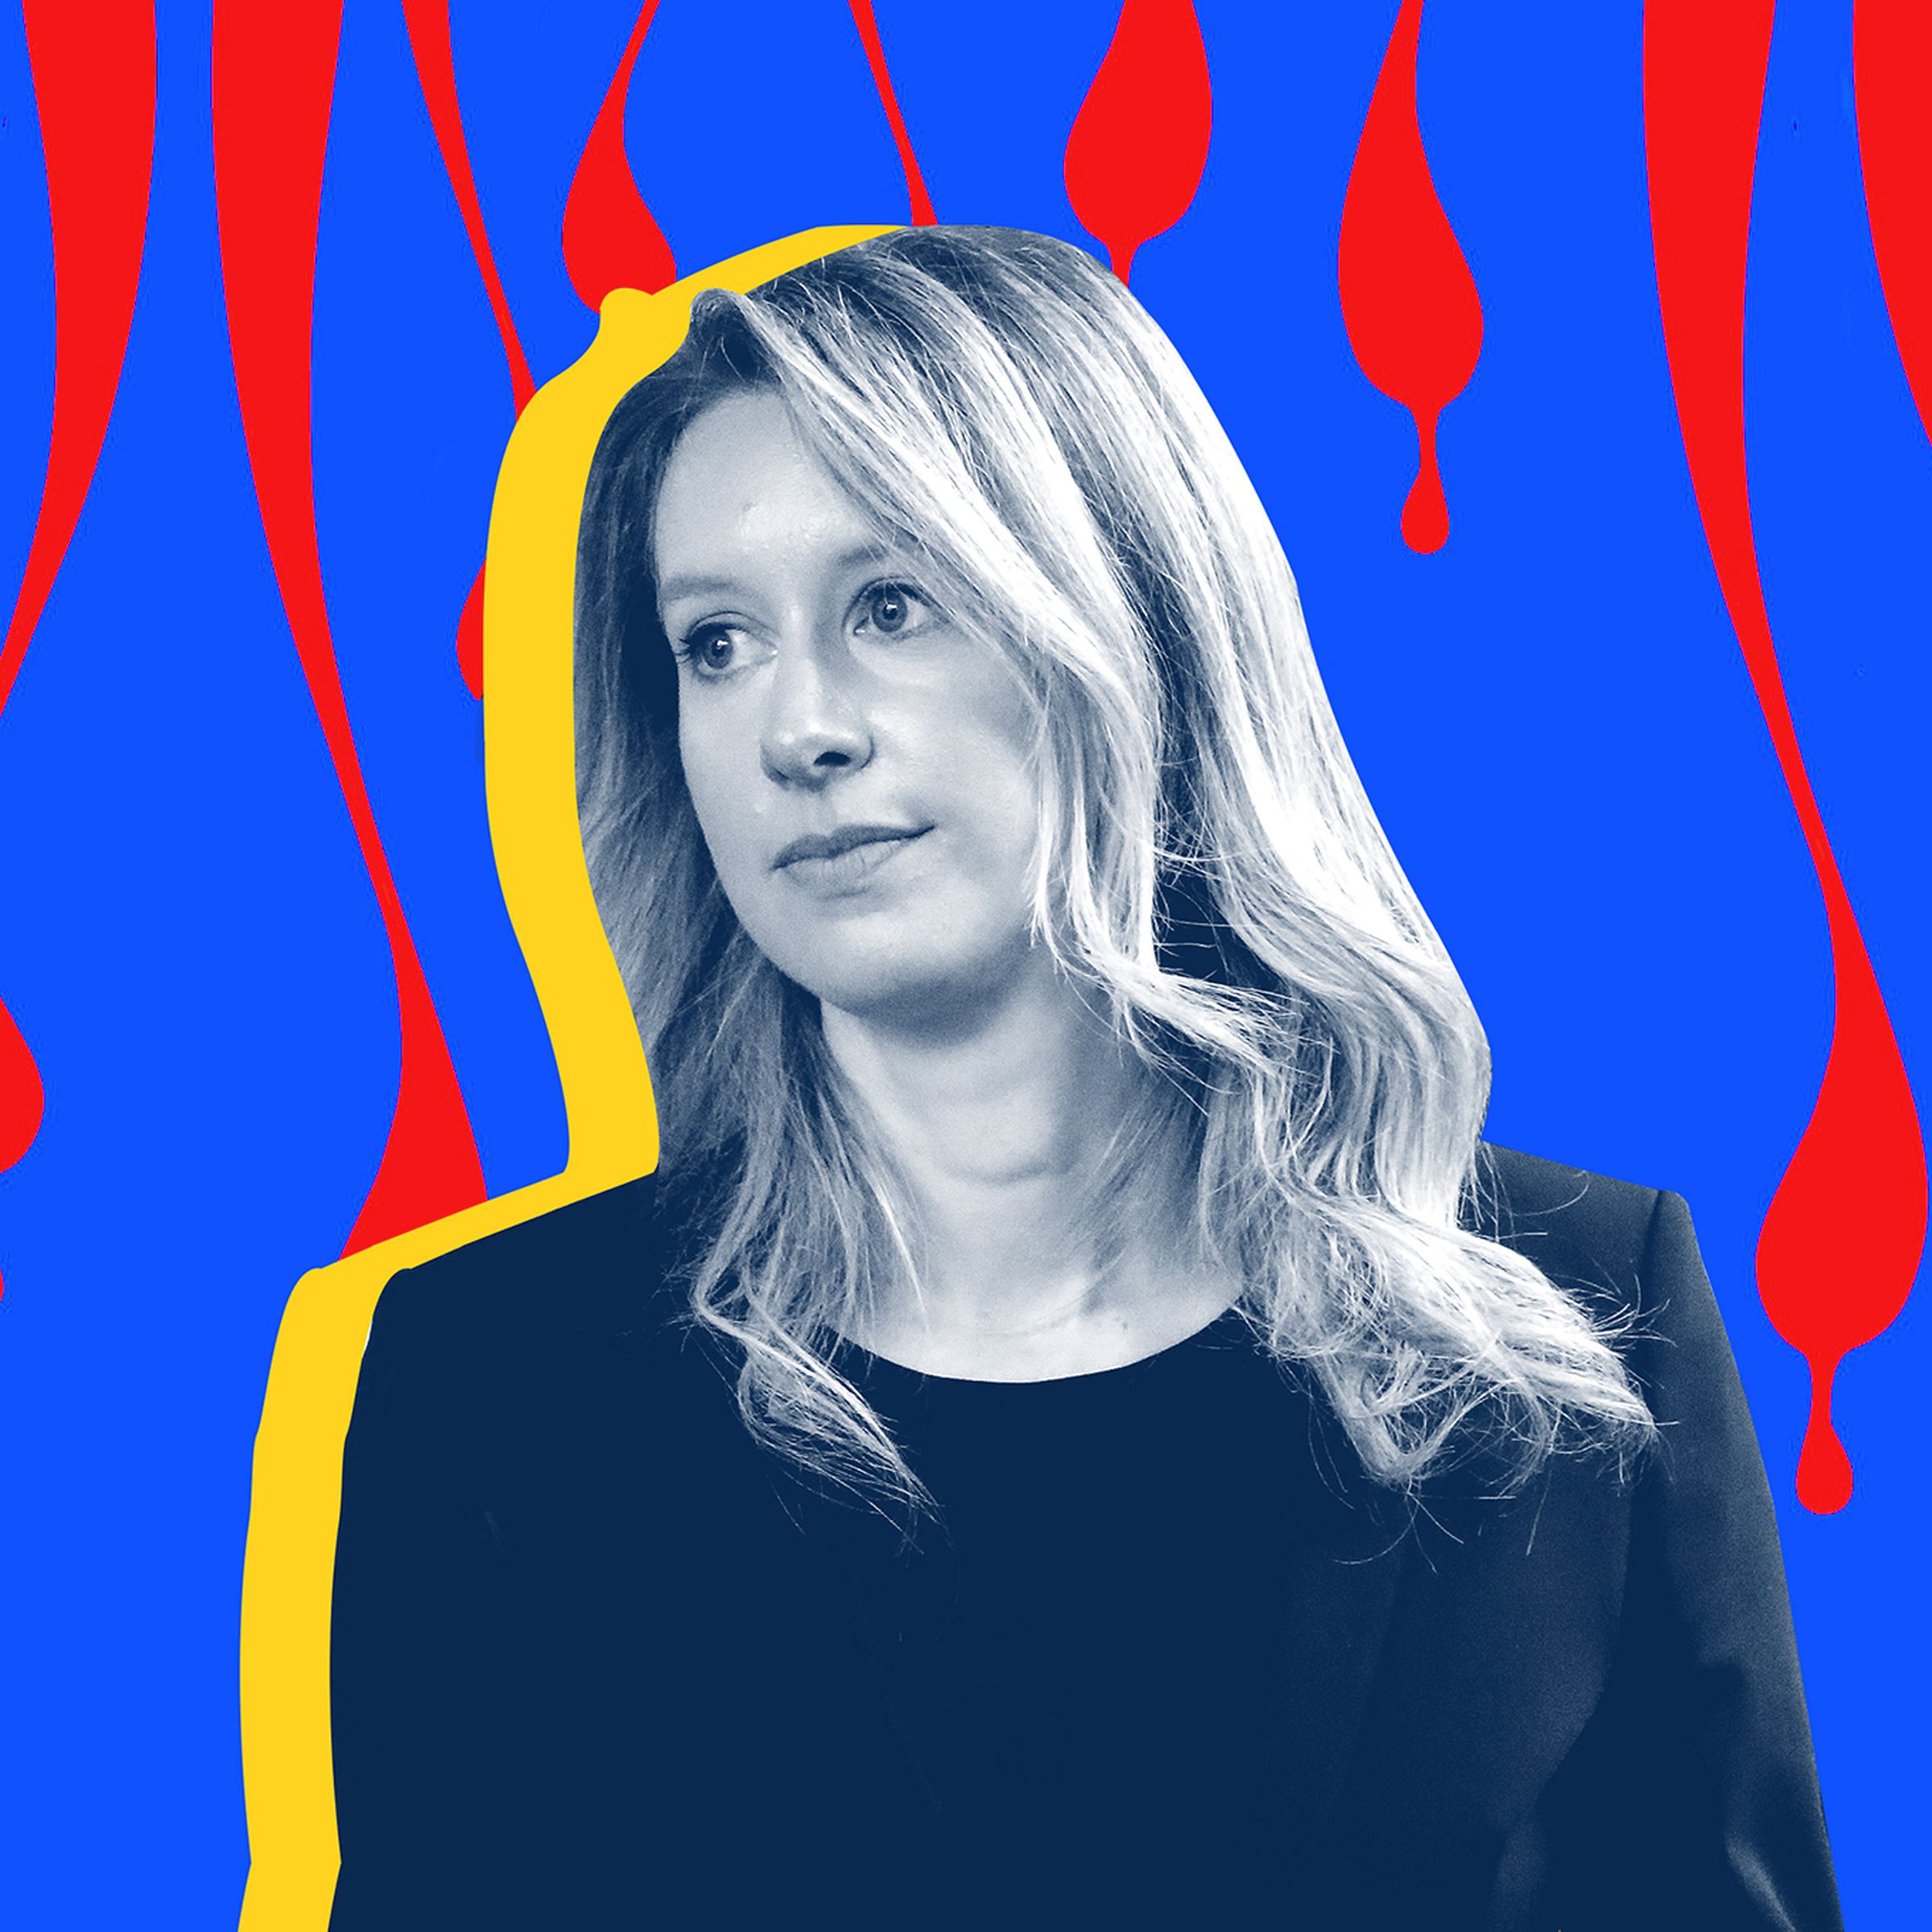 Elizabeth Holmes on a blue background with red streaks